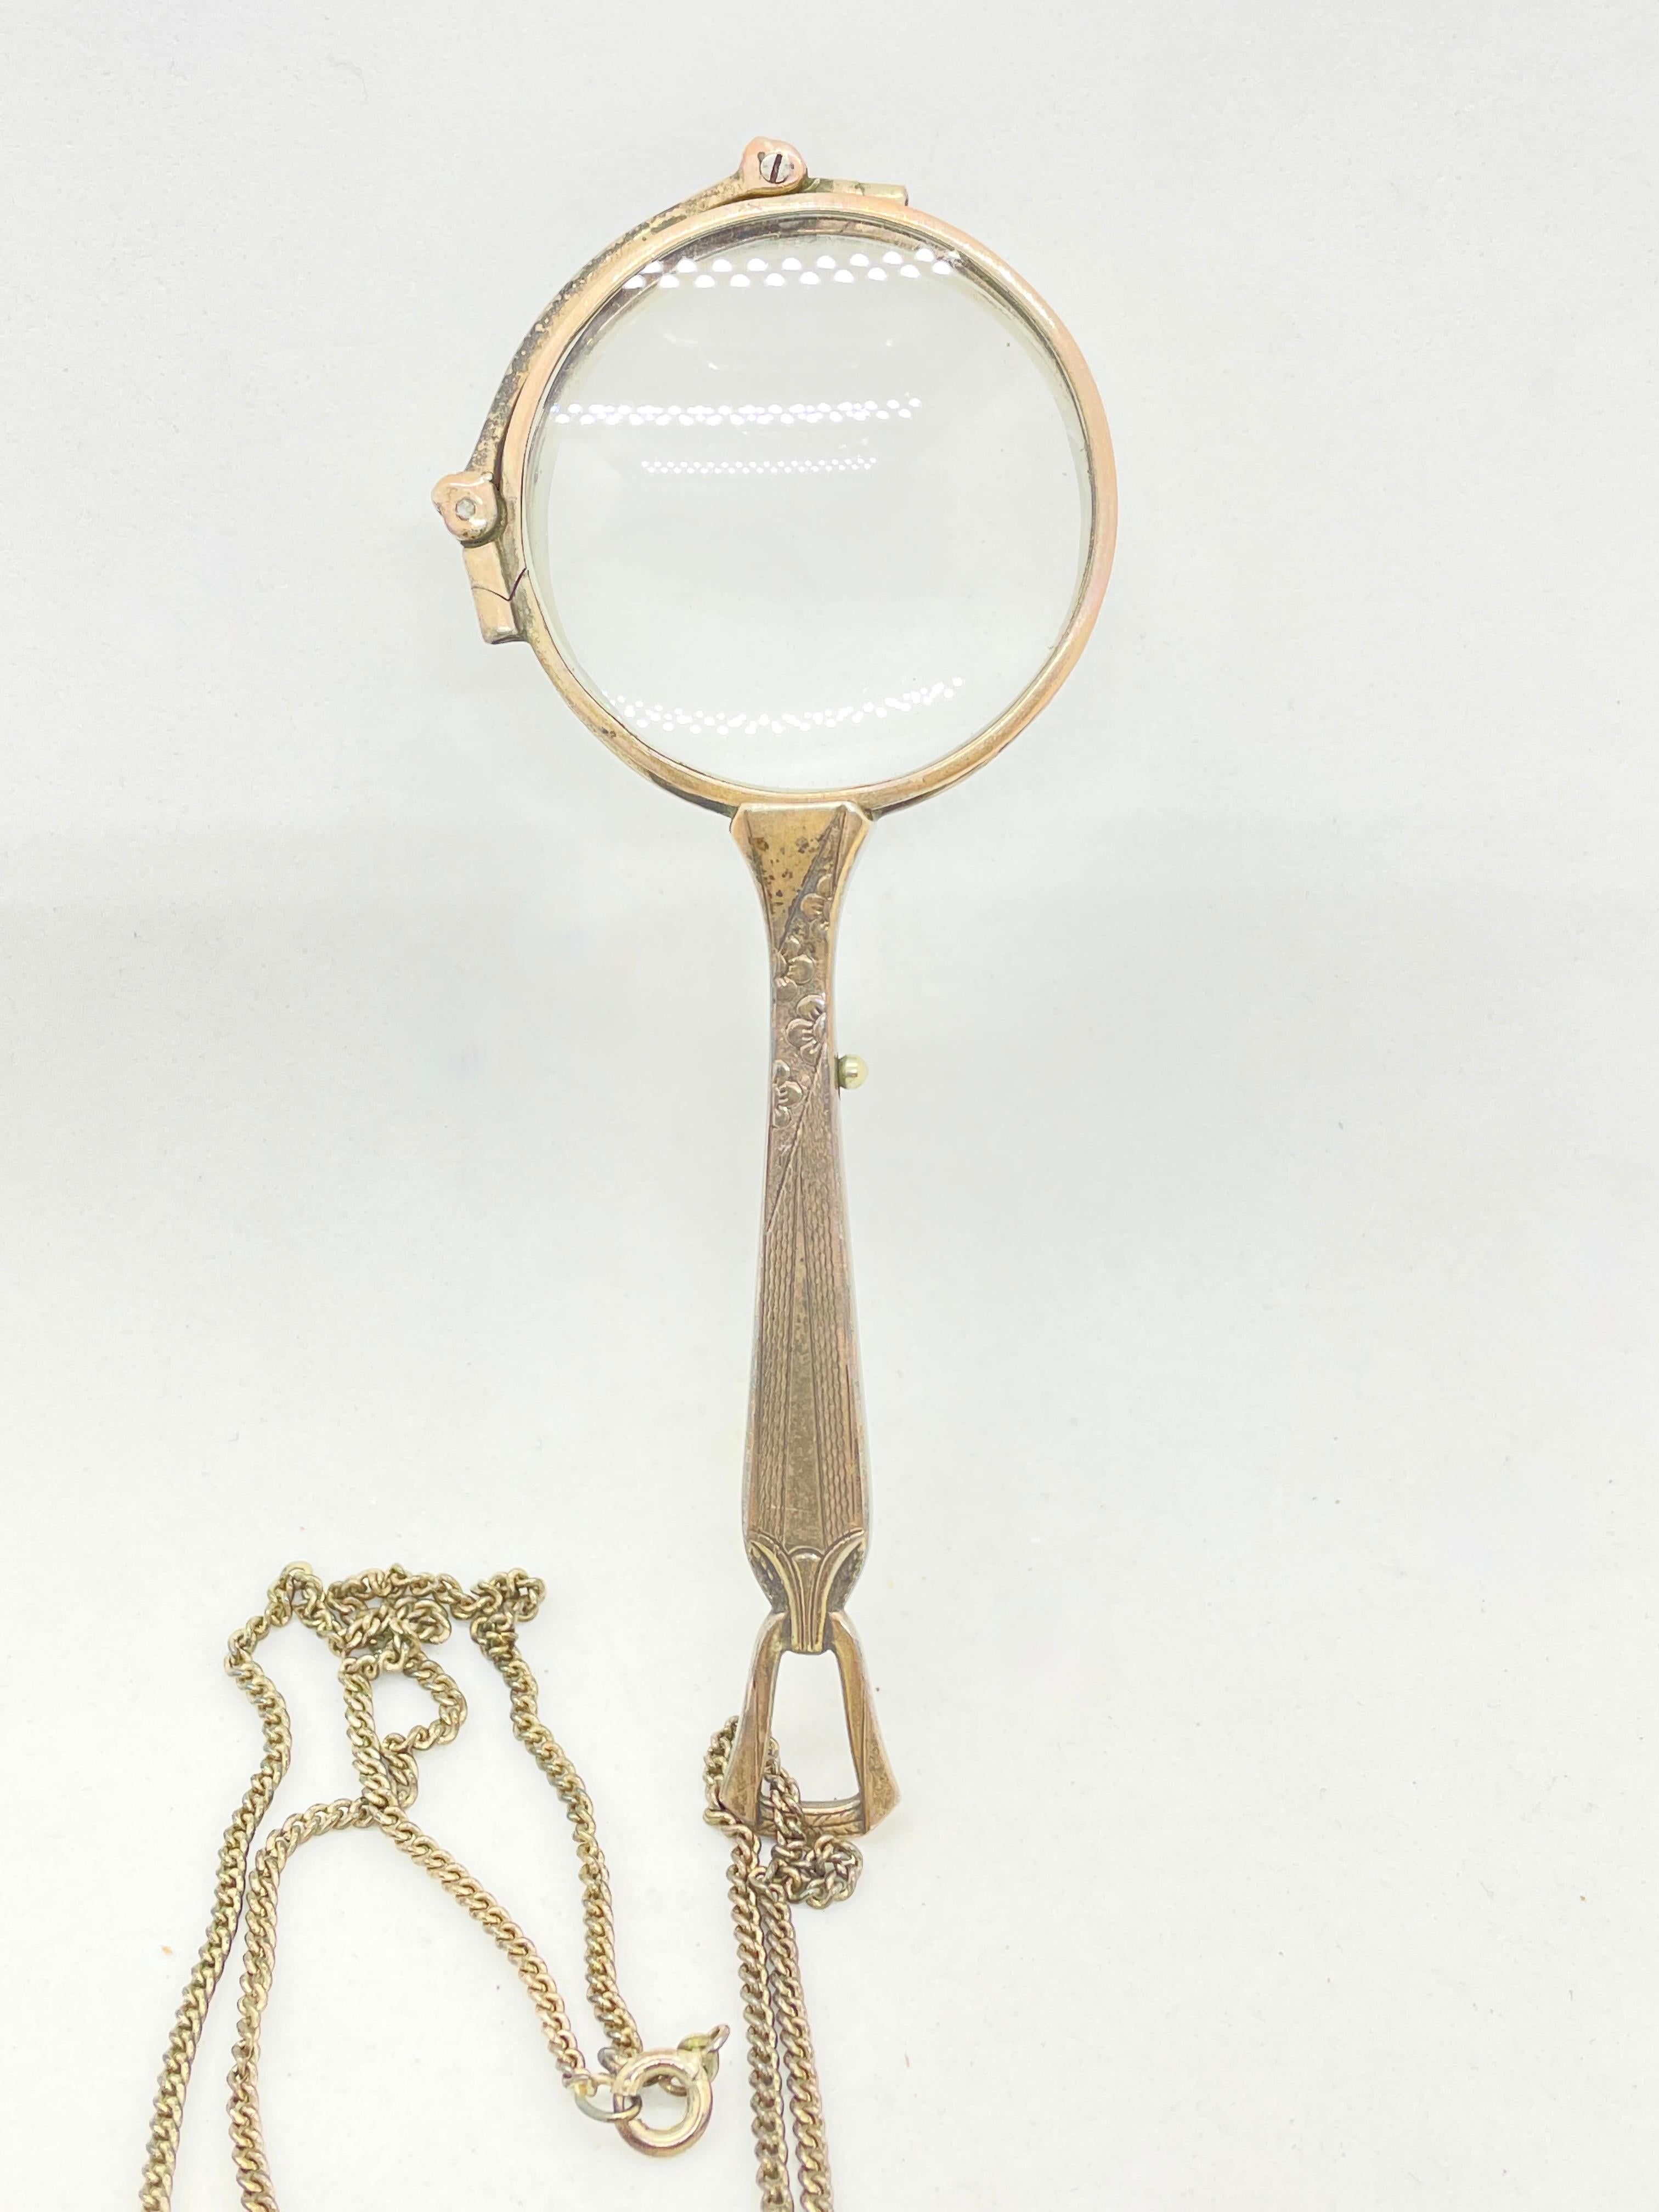 A gorgeous old fashioned 835 silver antique lorgnette with a refined design on the handle. This pair of eyeglasses or opera glasses feature a 